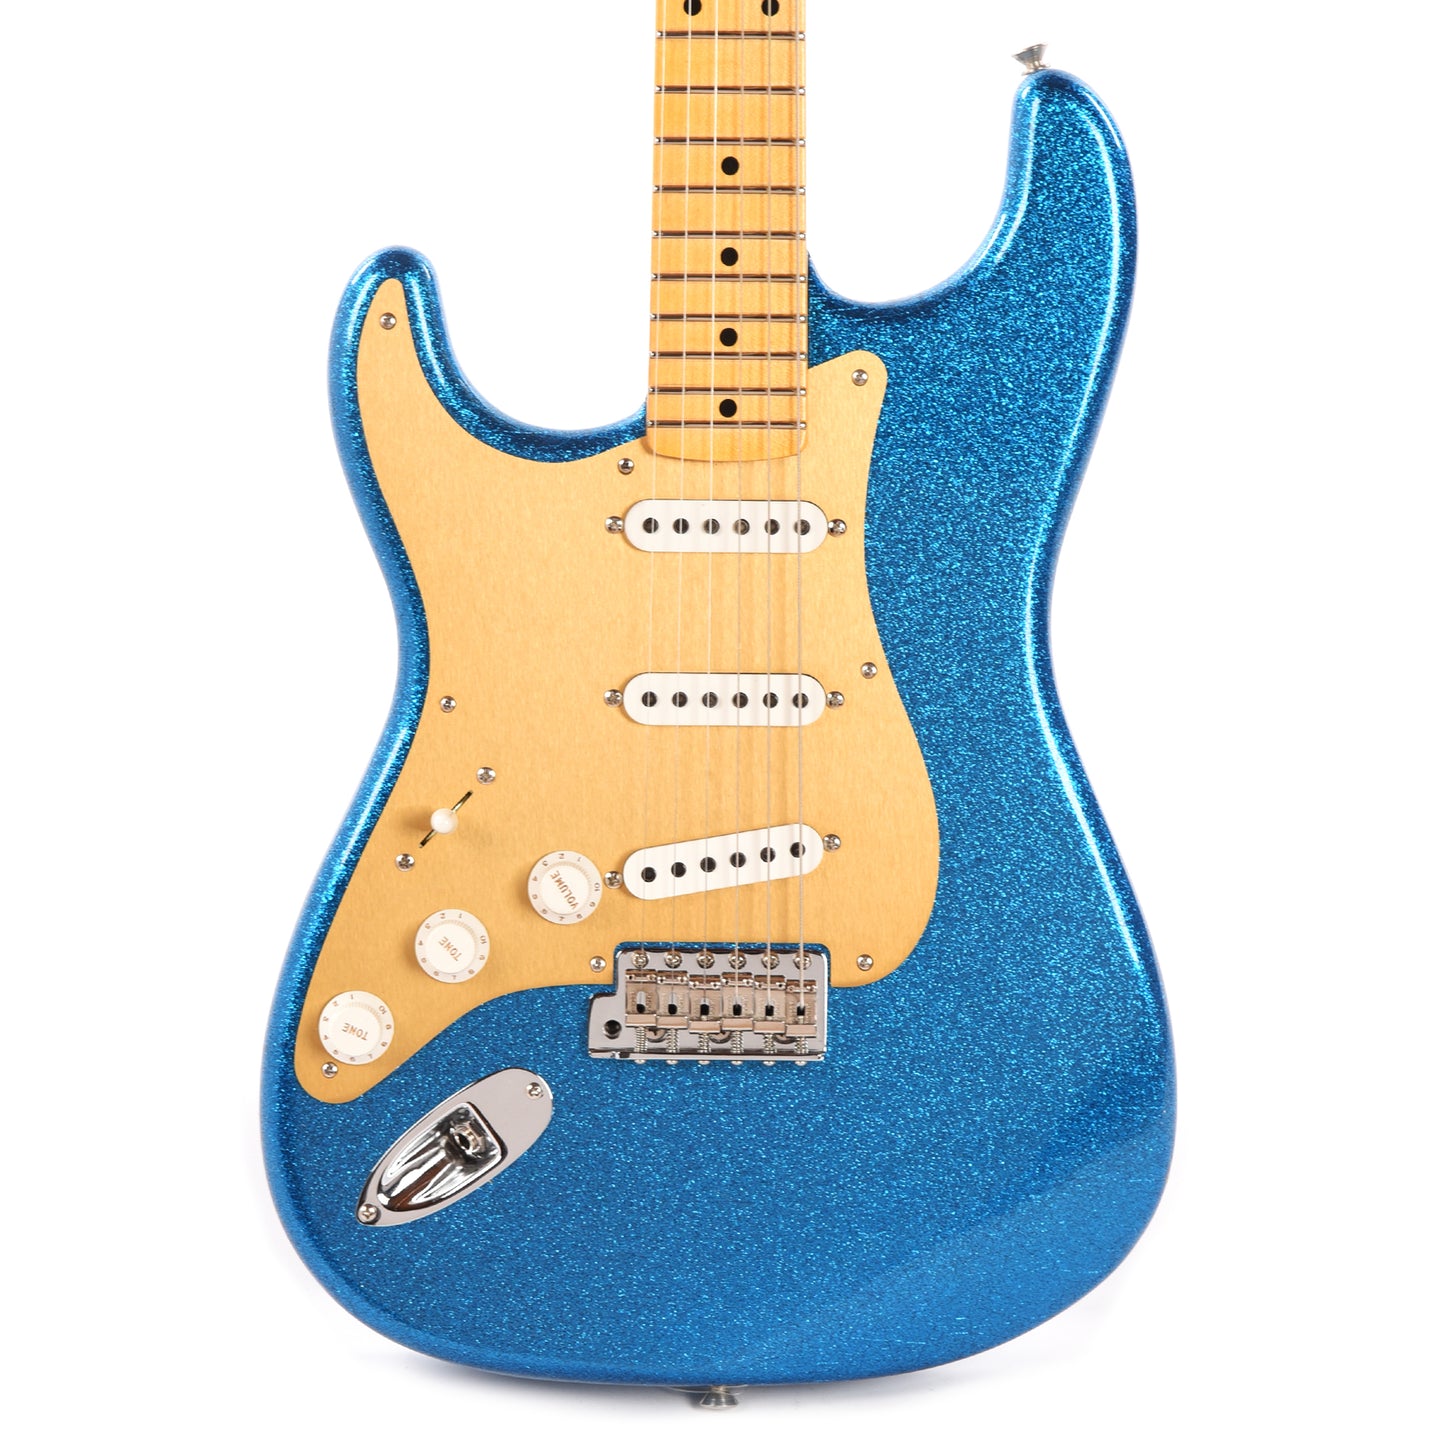 Fender Custom Shop 1955 Stratocaster "Chicago Special" LEFTY Deluxe Closet Classic Aged Blue Sparkle w/Anodized Gold Pickguard